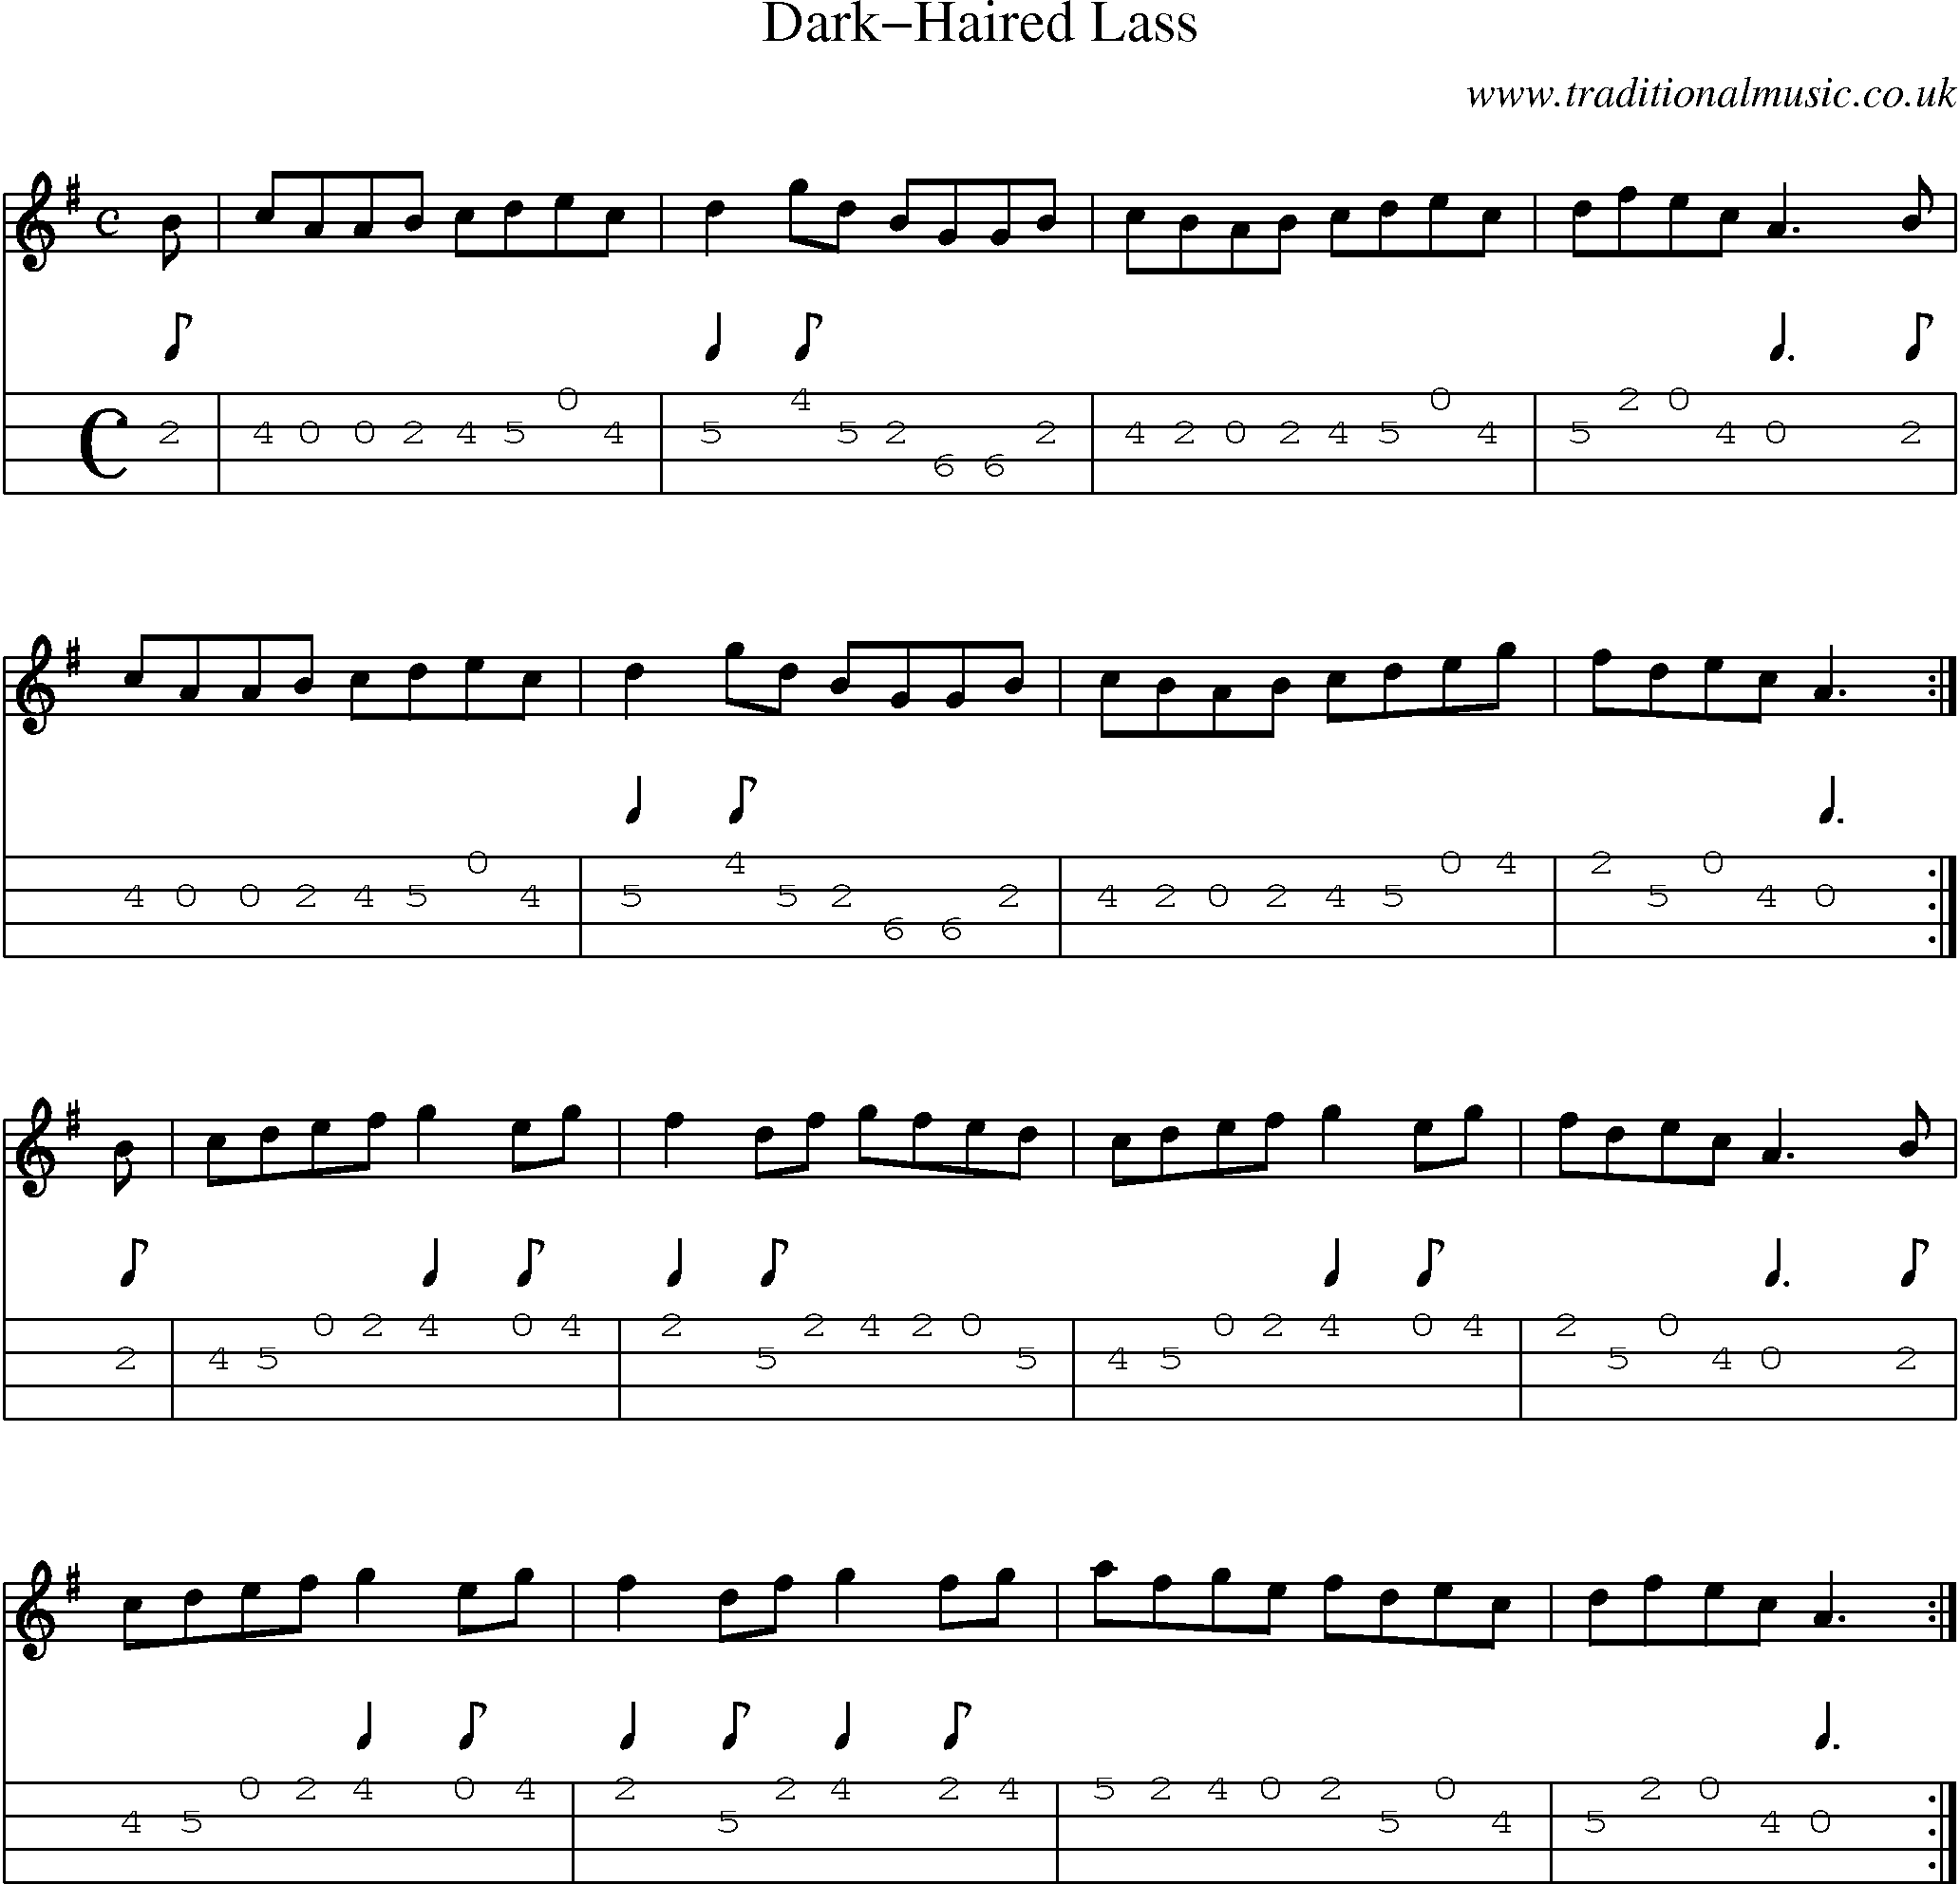 Music Score and Mandolin Tabs for Darkhaired Lass